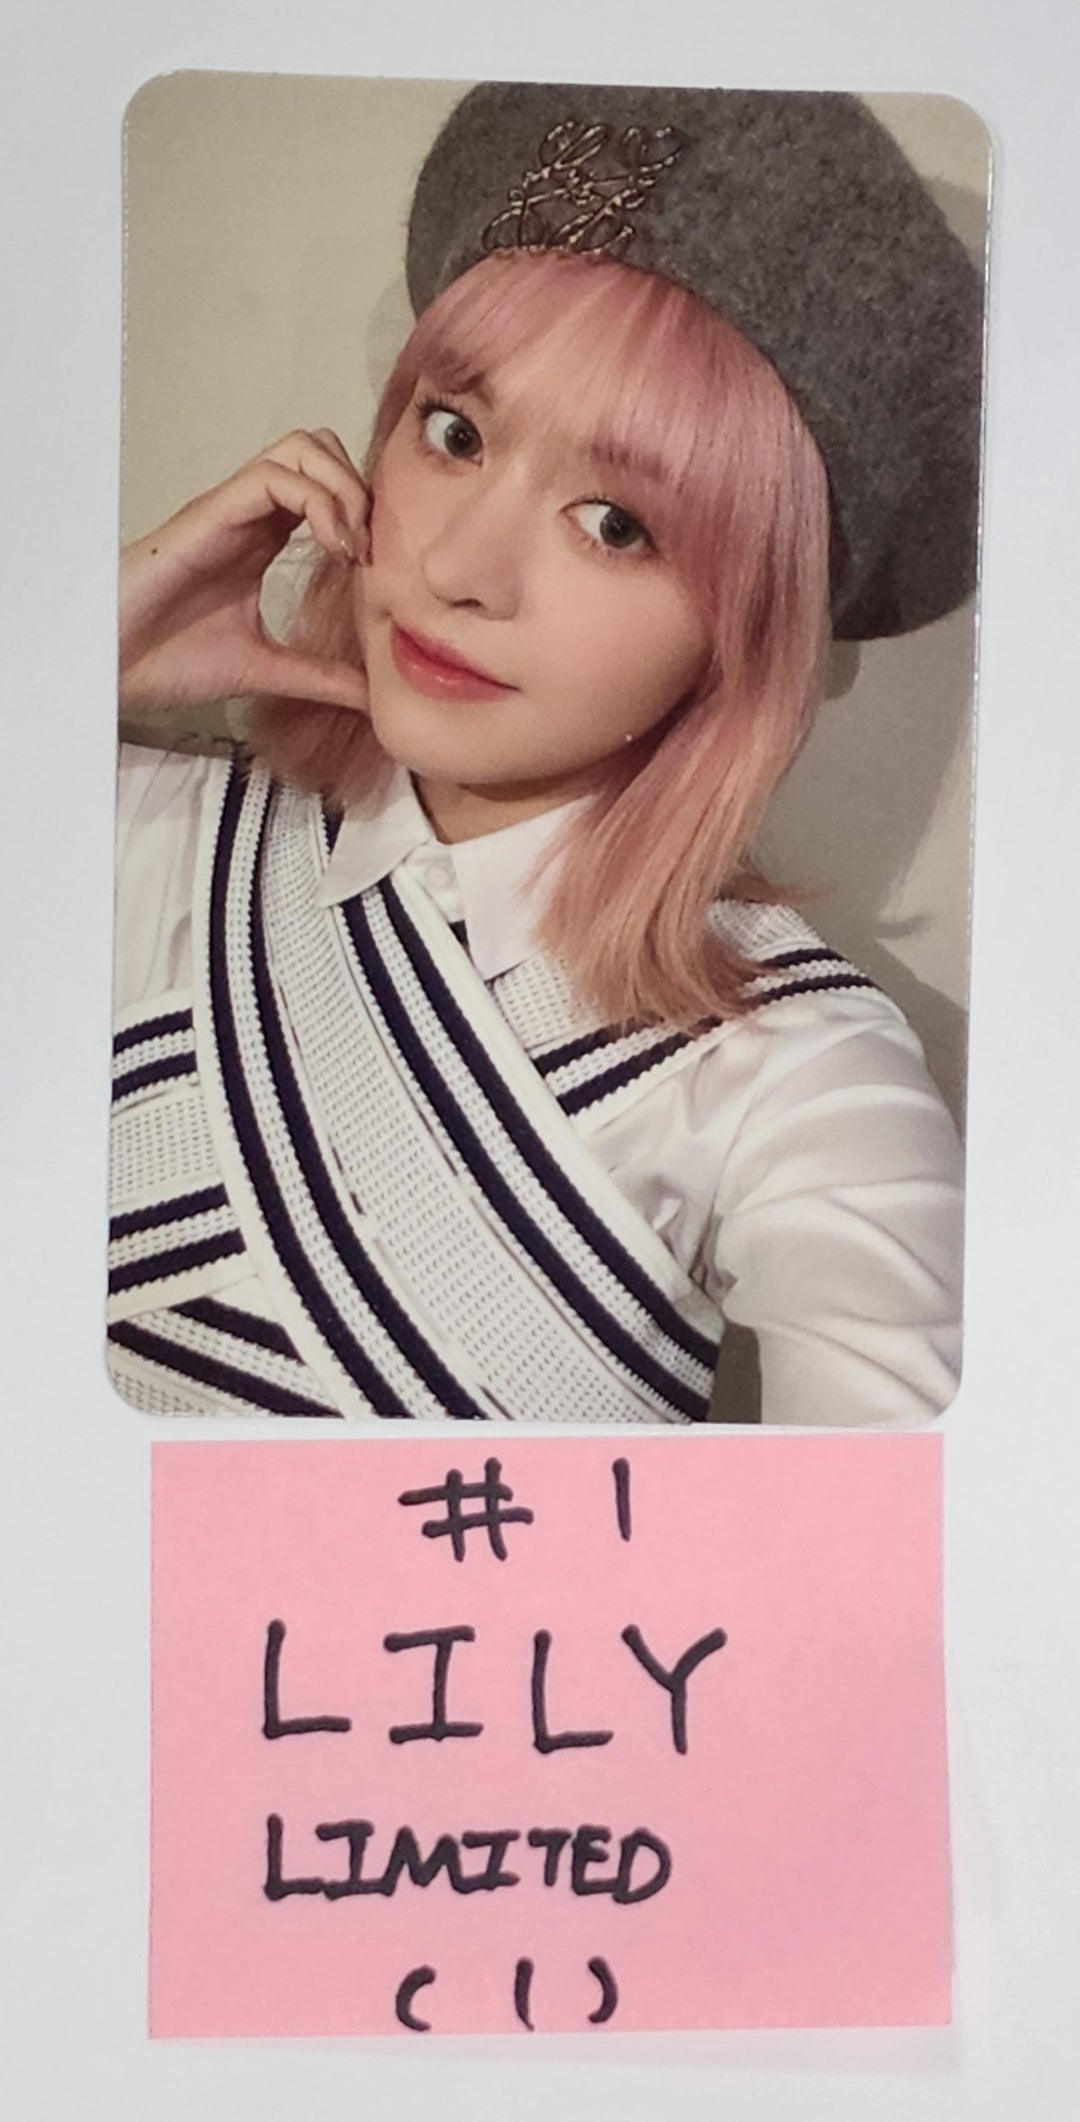 NMIXX "expergo" - Official Photocard, Character Card [Limited Ver.] [Restocked 3/22]